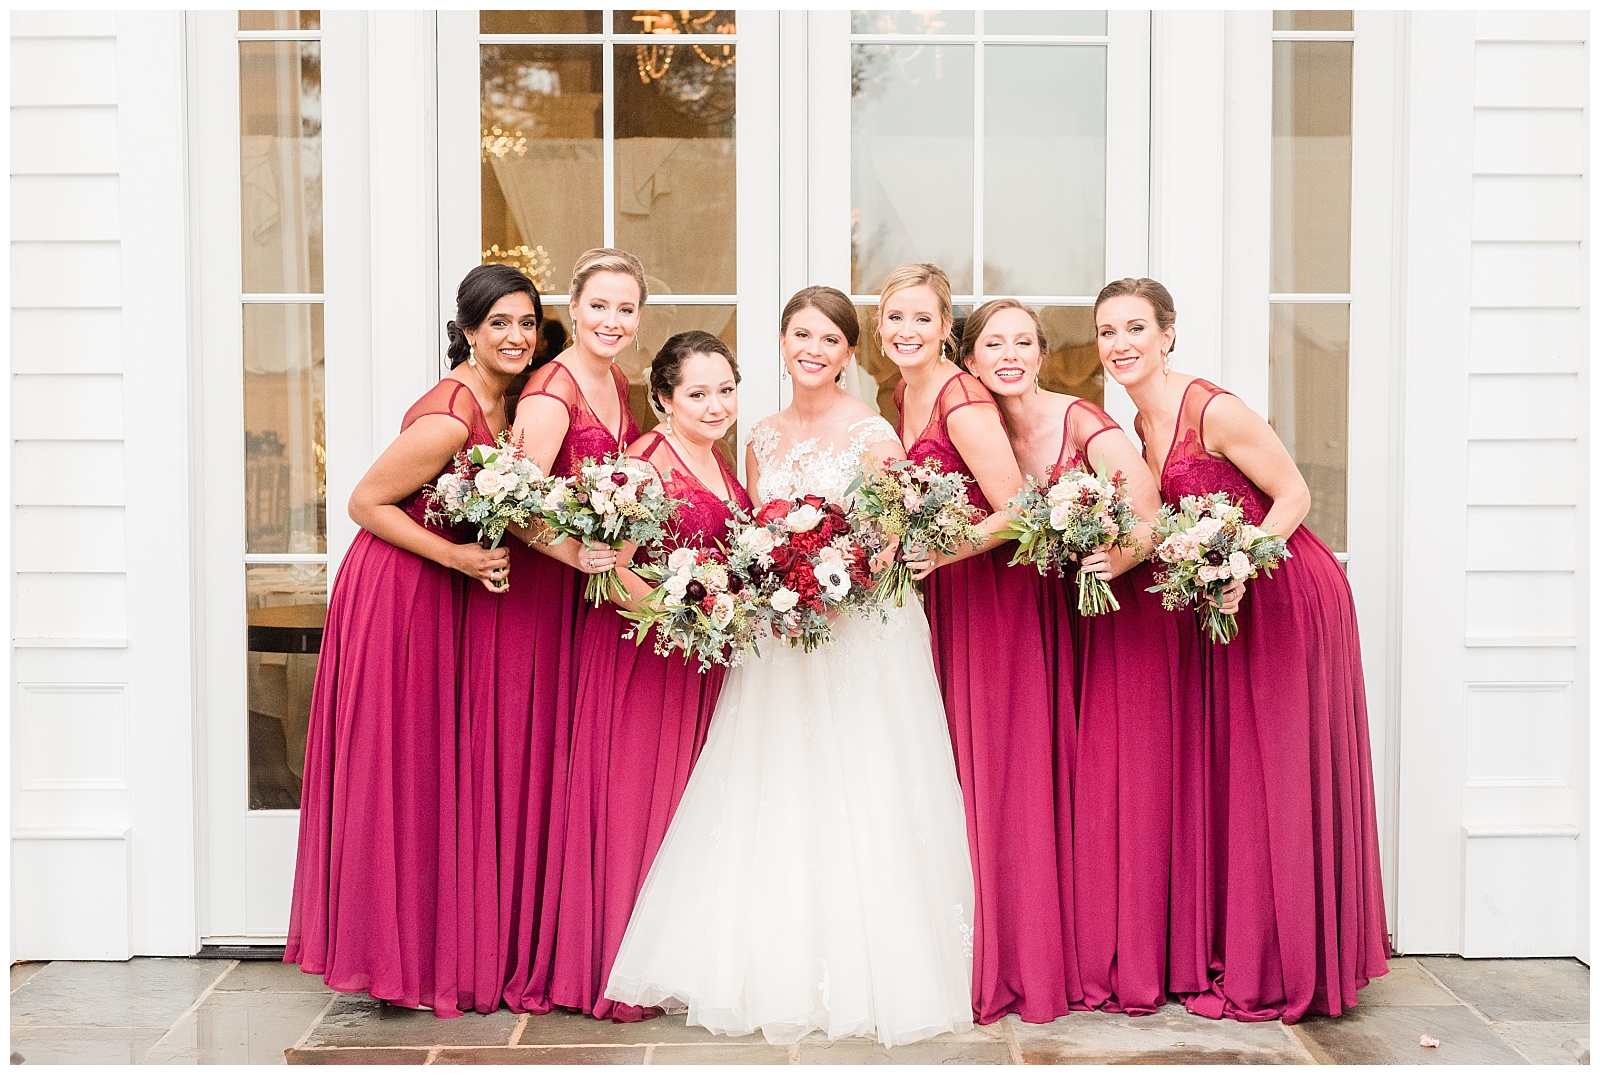 Bridal Party,Bridesmaids,Groomsmen,NJ,New Jersey,The Ryland Inn,Twisted Willow,Wedding,Wedding Party,Wedding Photographer,Winter,